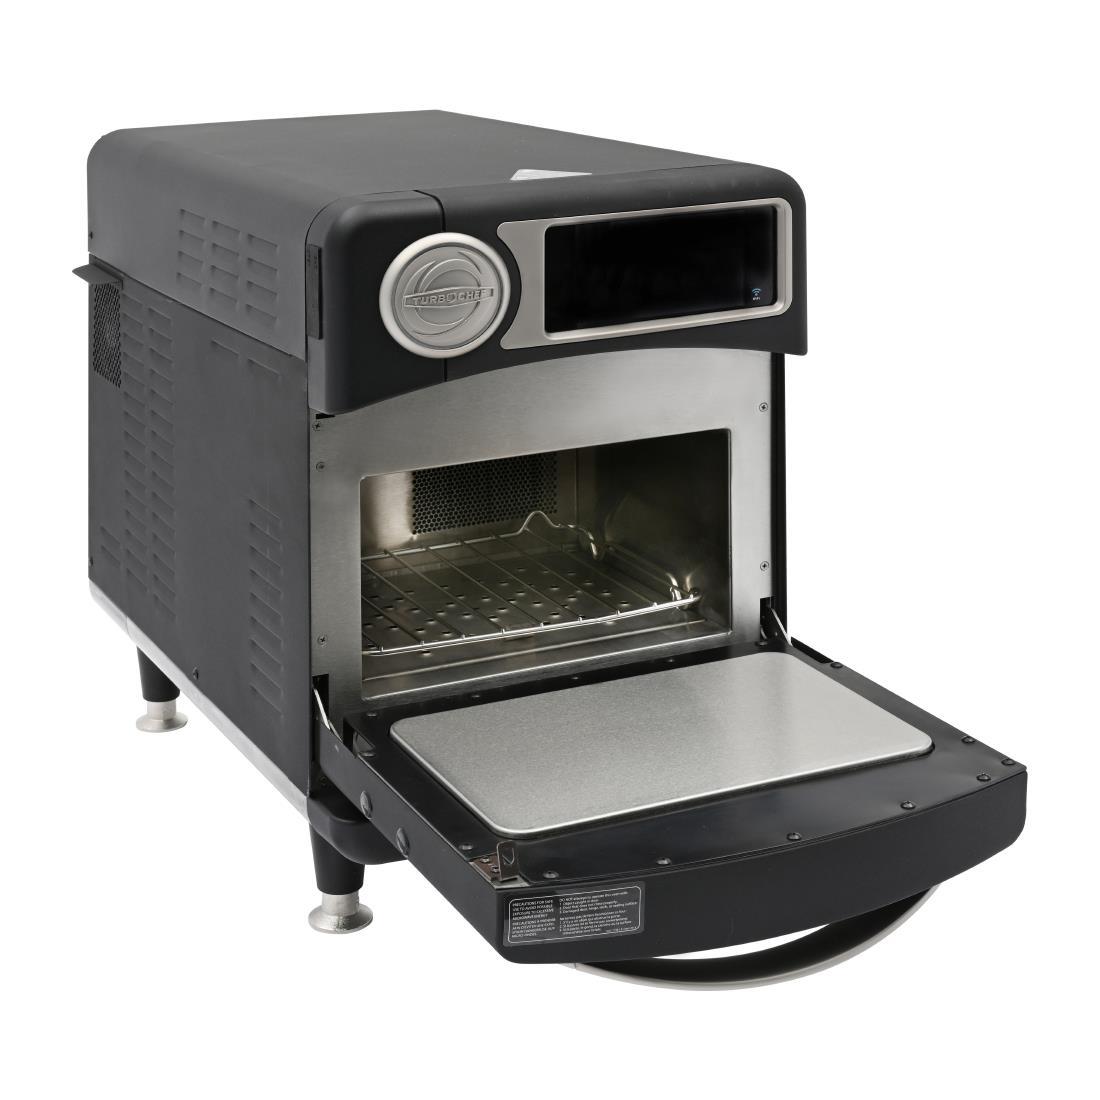 Turbochef Sota Touch Ventless Rapid Cook Oven